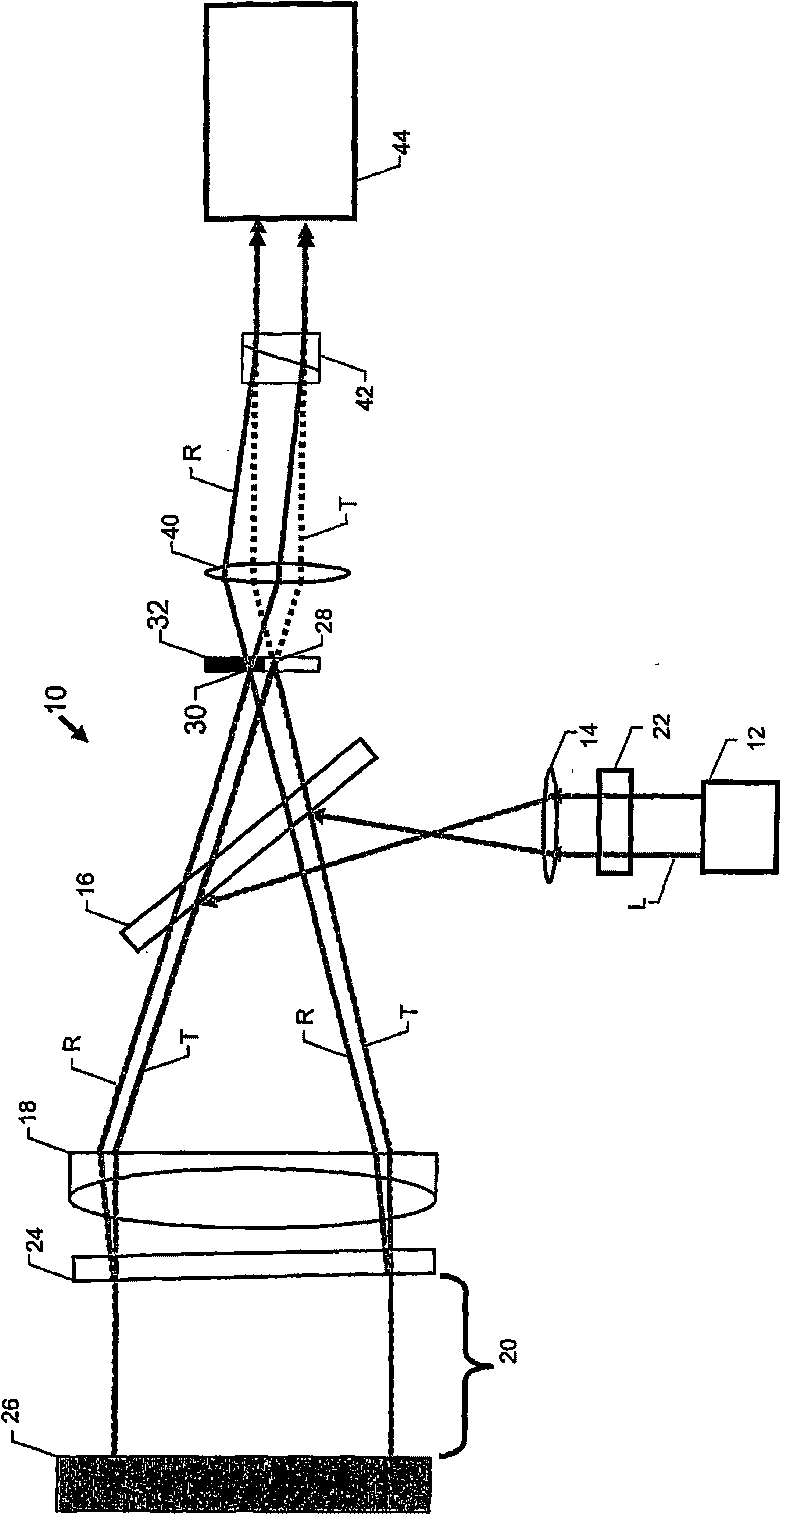 Fizeau interferometer with simultaneous phase shifting